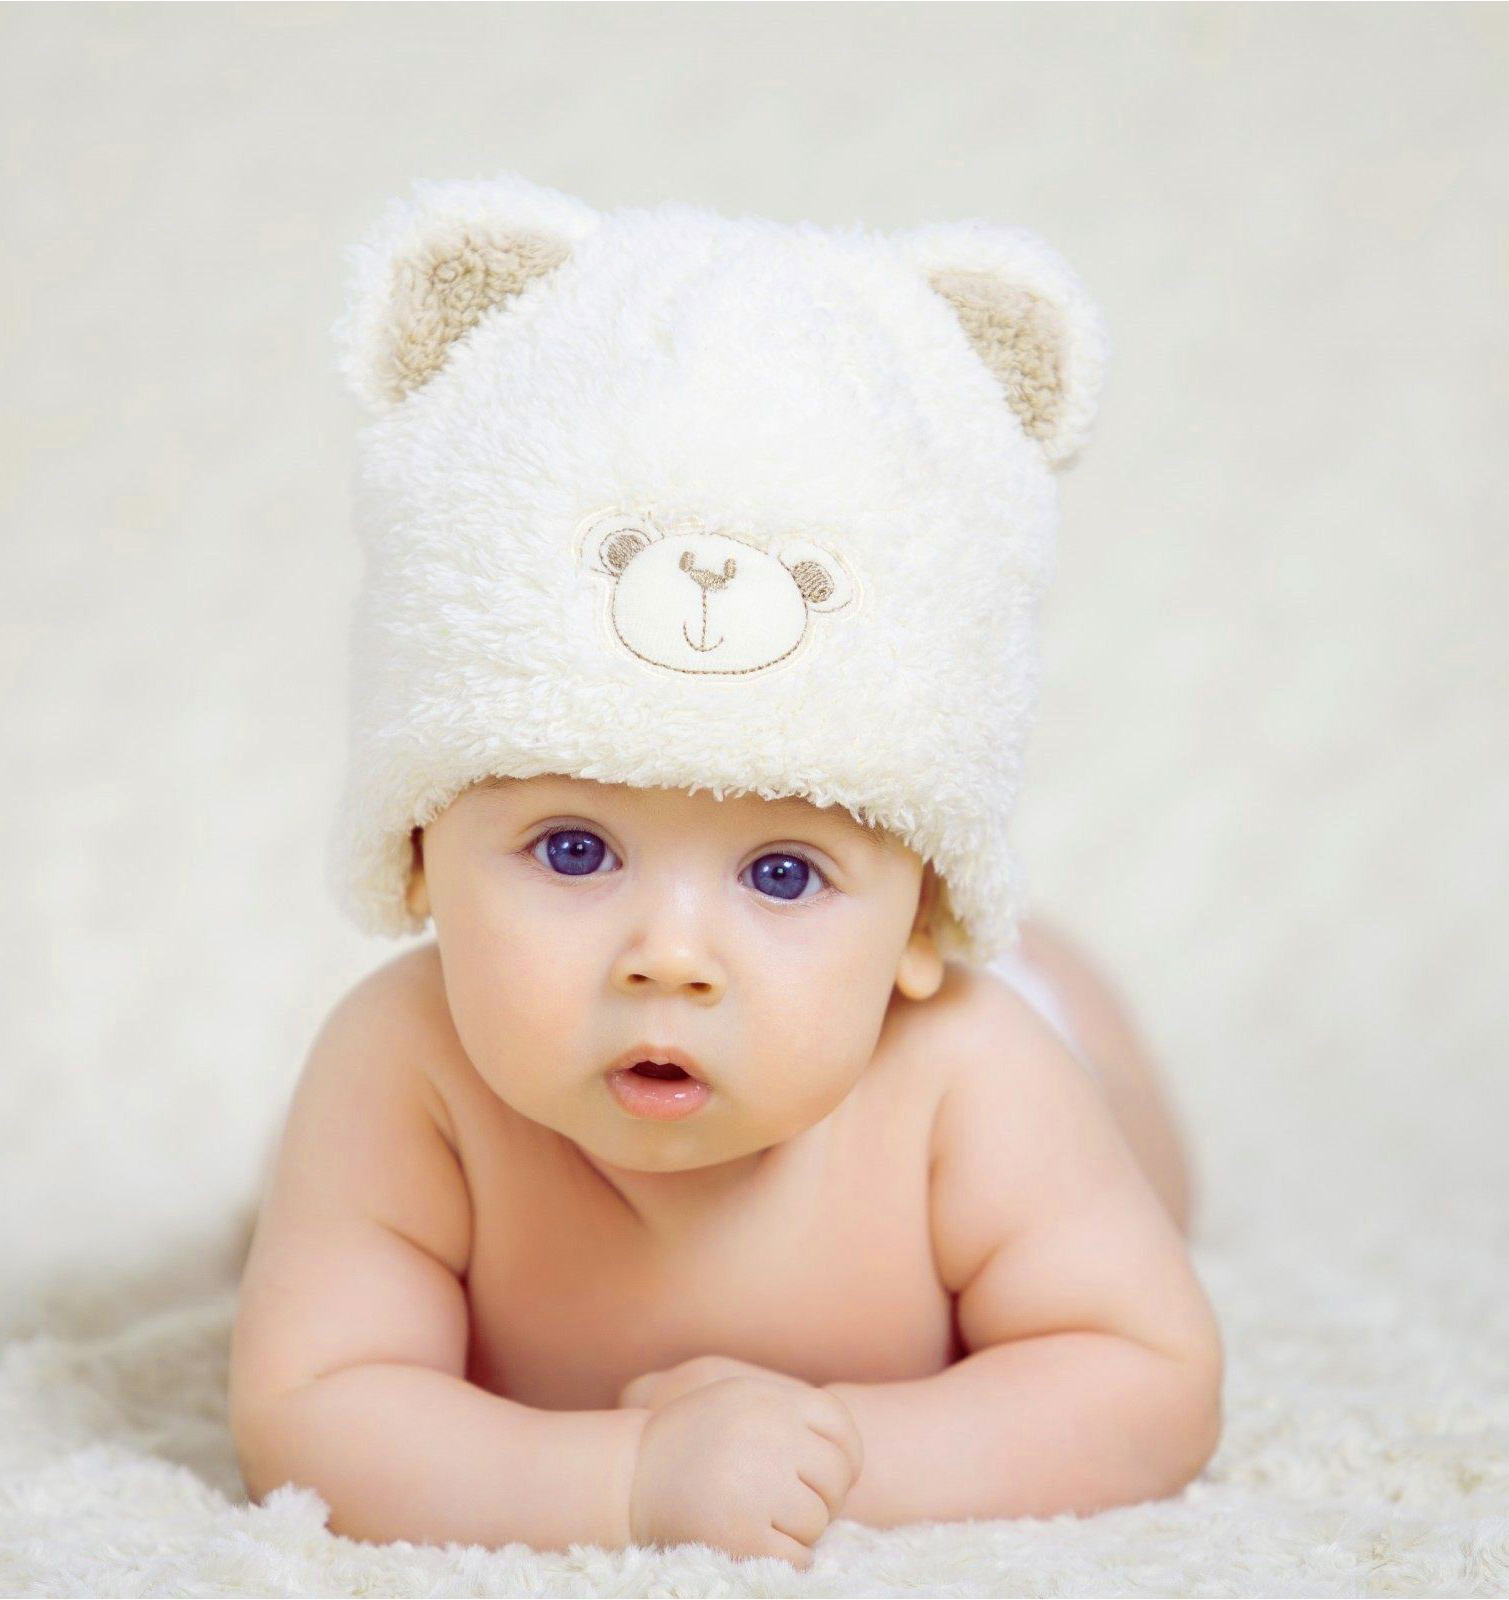 Cute Baby Boy Image Wallpaper Picture Download Morning Cute Baby Wallpaper & Background Download